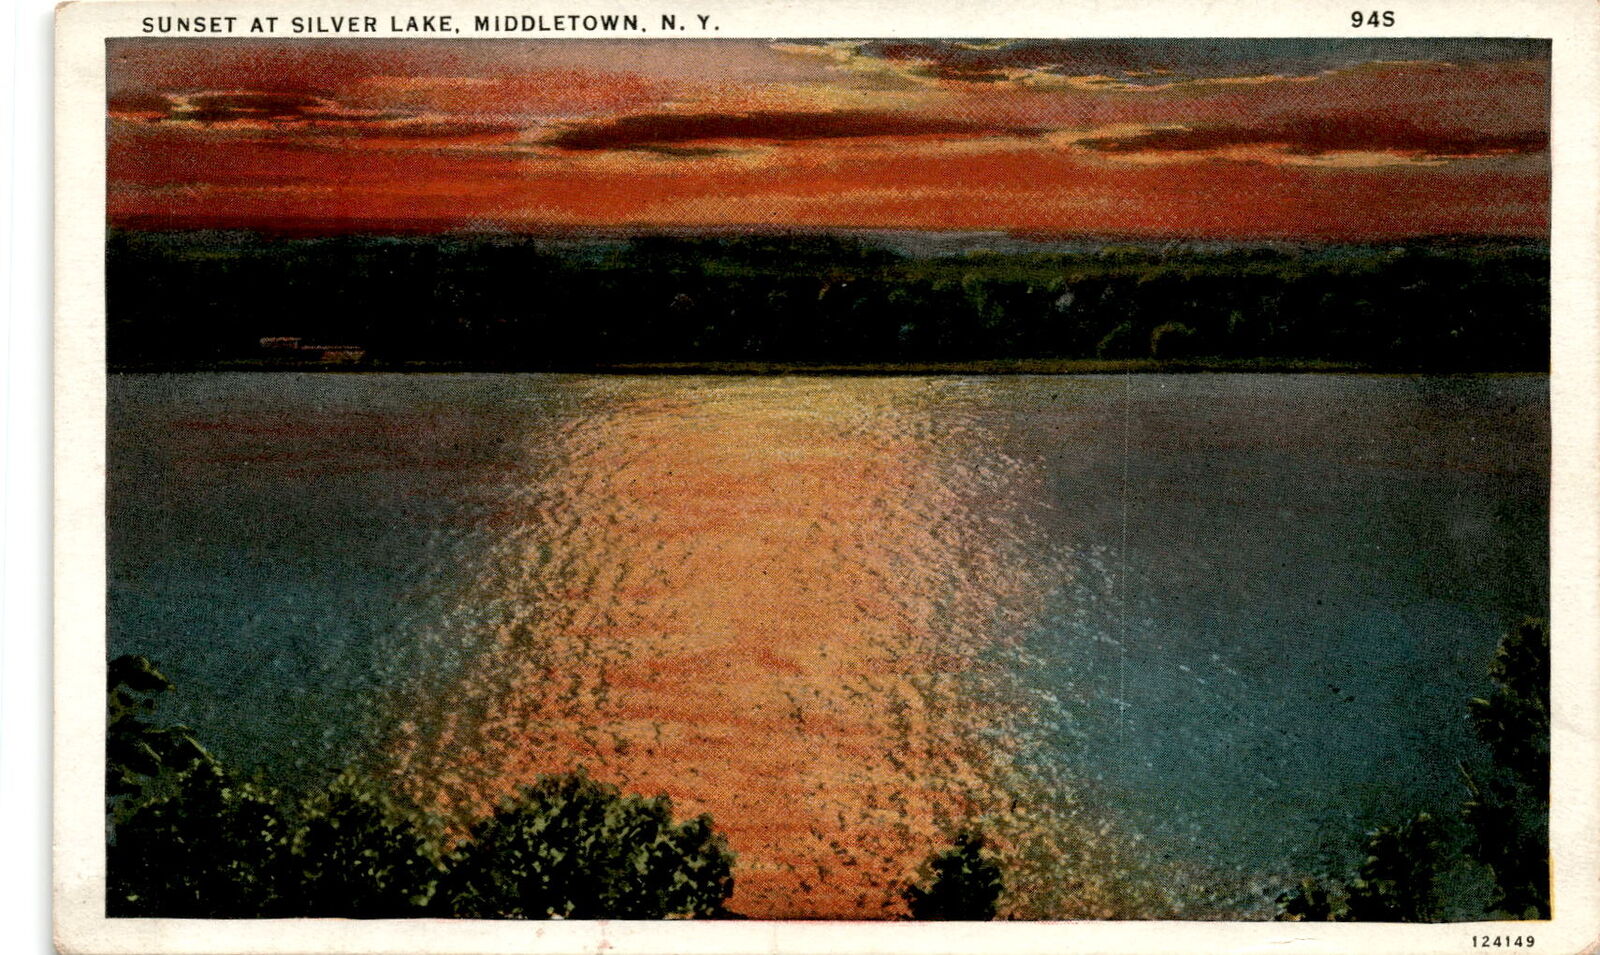 picturesque sunset Silver Lake Middletown NY hidden gem tranquil Postcard